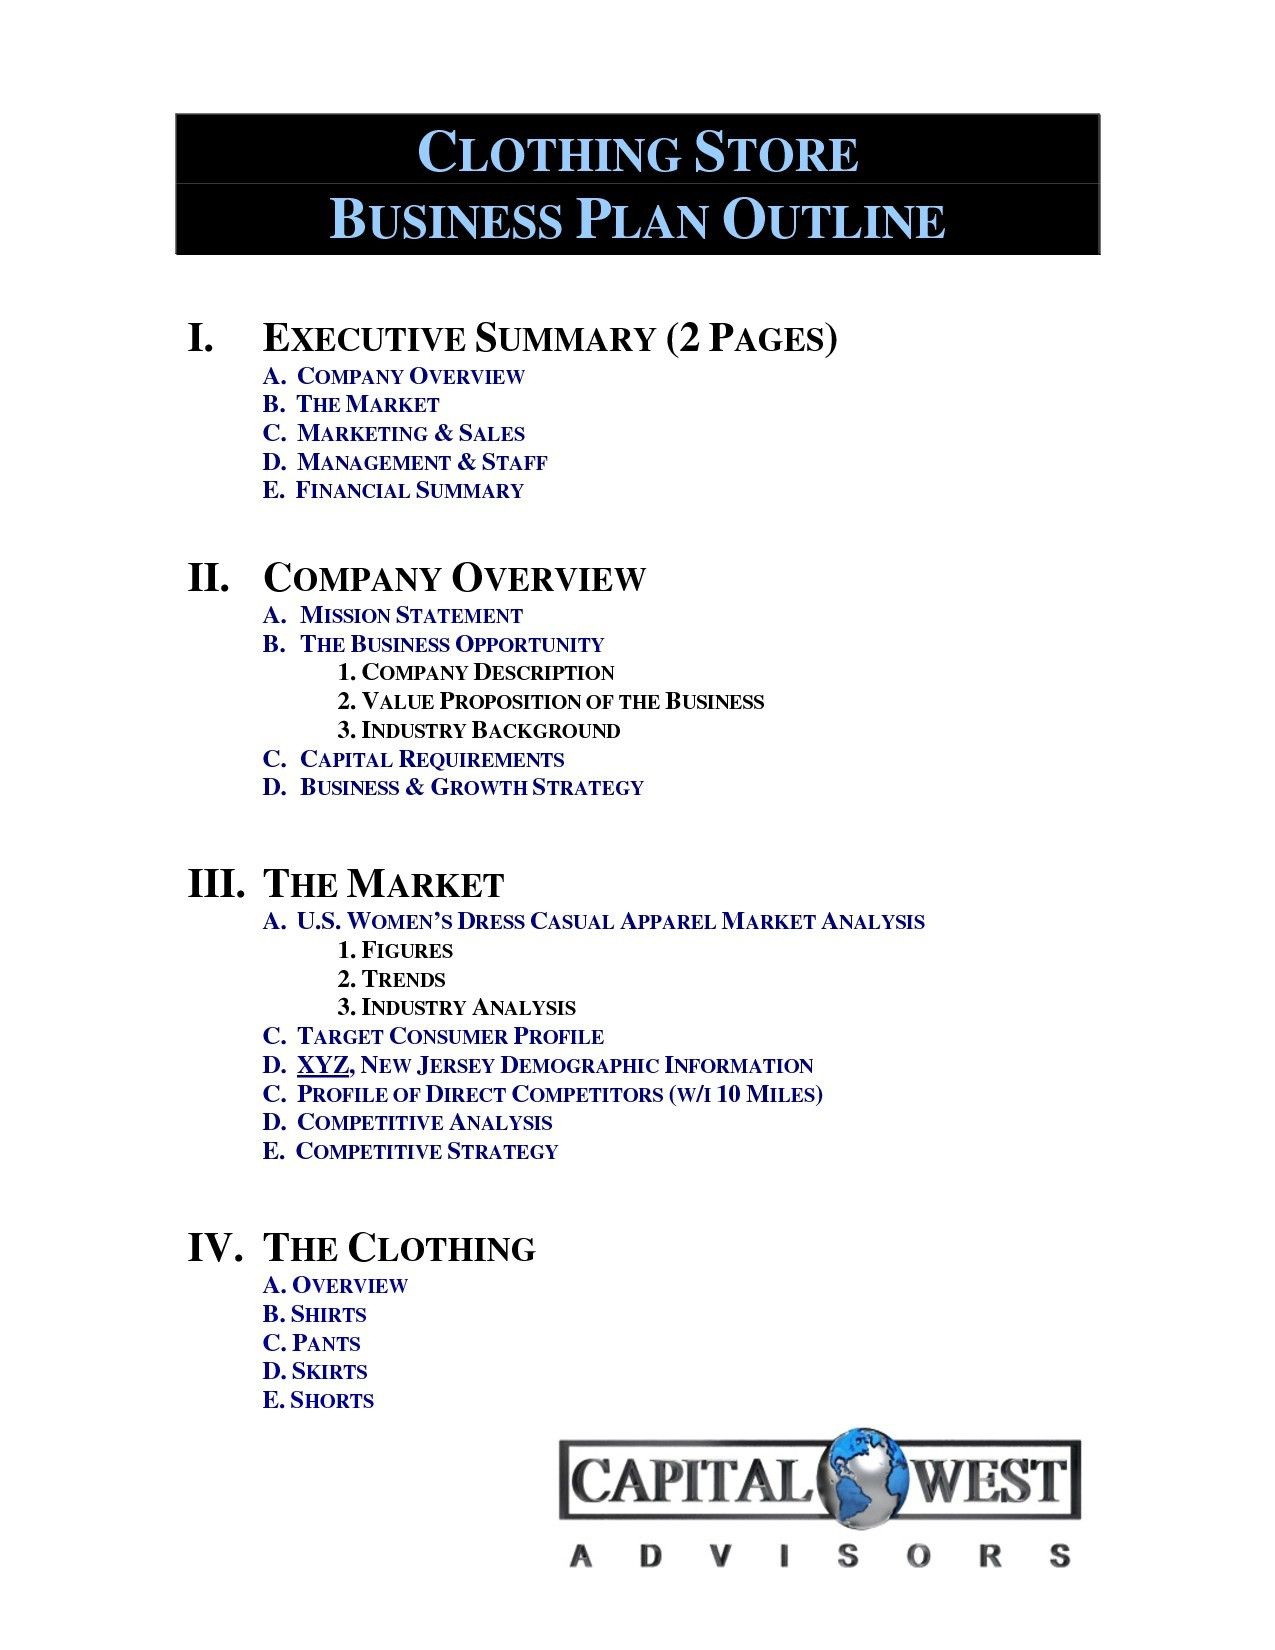 Download New Clothing Line Business Plan Template Can Save At New Clothing Line Business Retail Business Plan Business Plan Example Business Plan Template Free